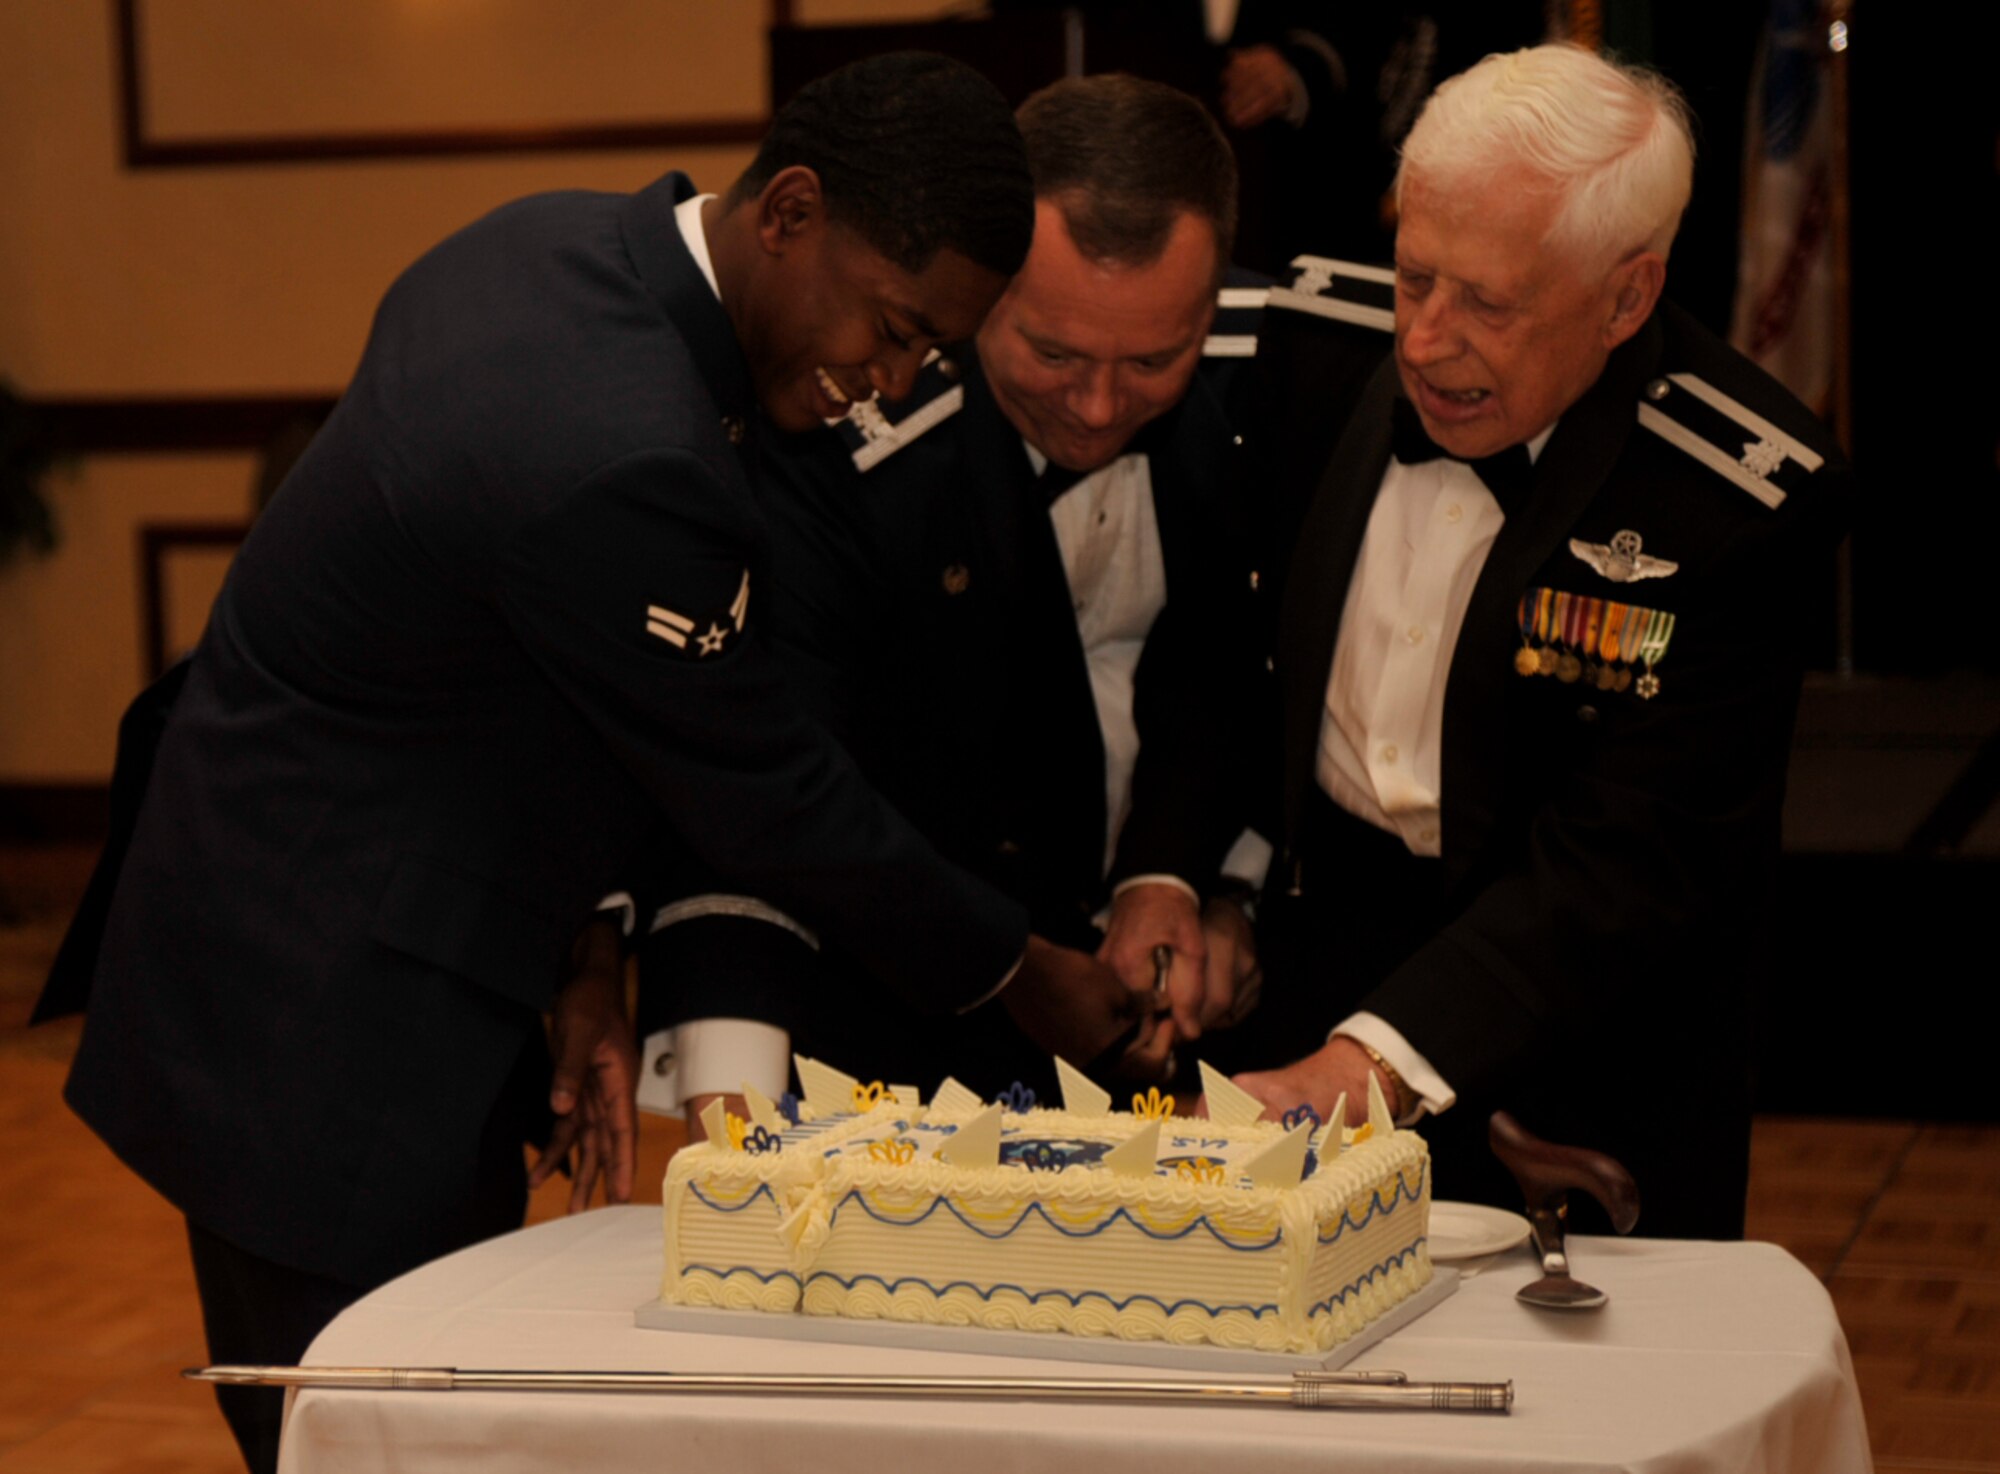 (L-R) Airman 1st Class Aaron Oden, 92nd Air Refueling Wing administrative apprentice, Col. Brian McDaniel, 92nd Air Refueling Wing Commander, and Retired Lt. Col. George Swagel cut the cake during the Air Force Ball Sept. 18, 2015, at Spokane Wash. Oden was the youngest Airman at the event and Swagel was the oldest.  Fairchild Air Force Base members celebrated the 68th birthday of the U.S. Air Force.